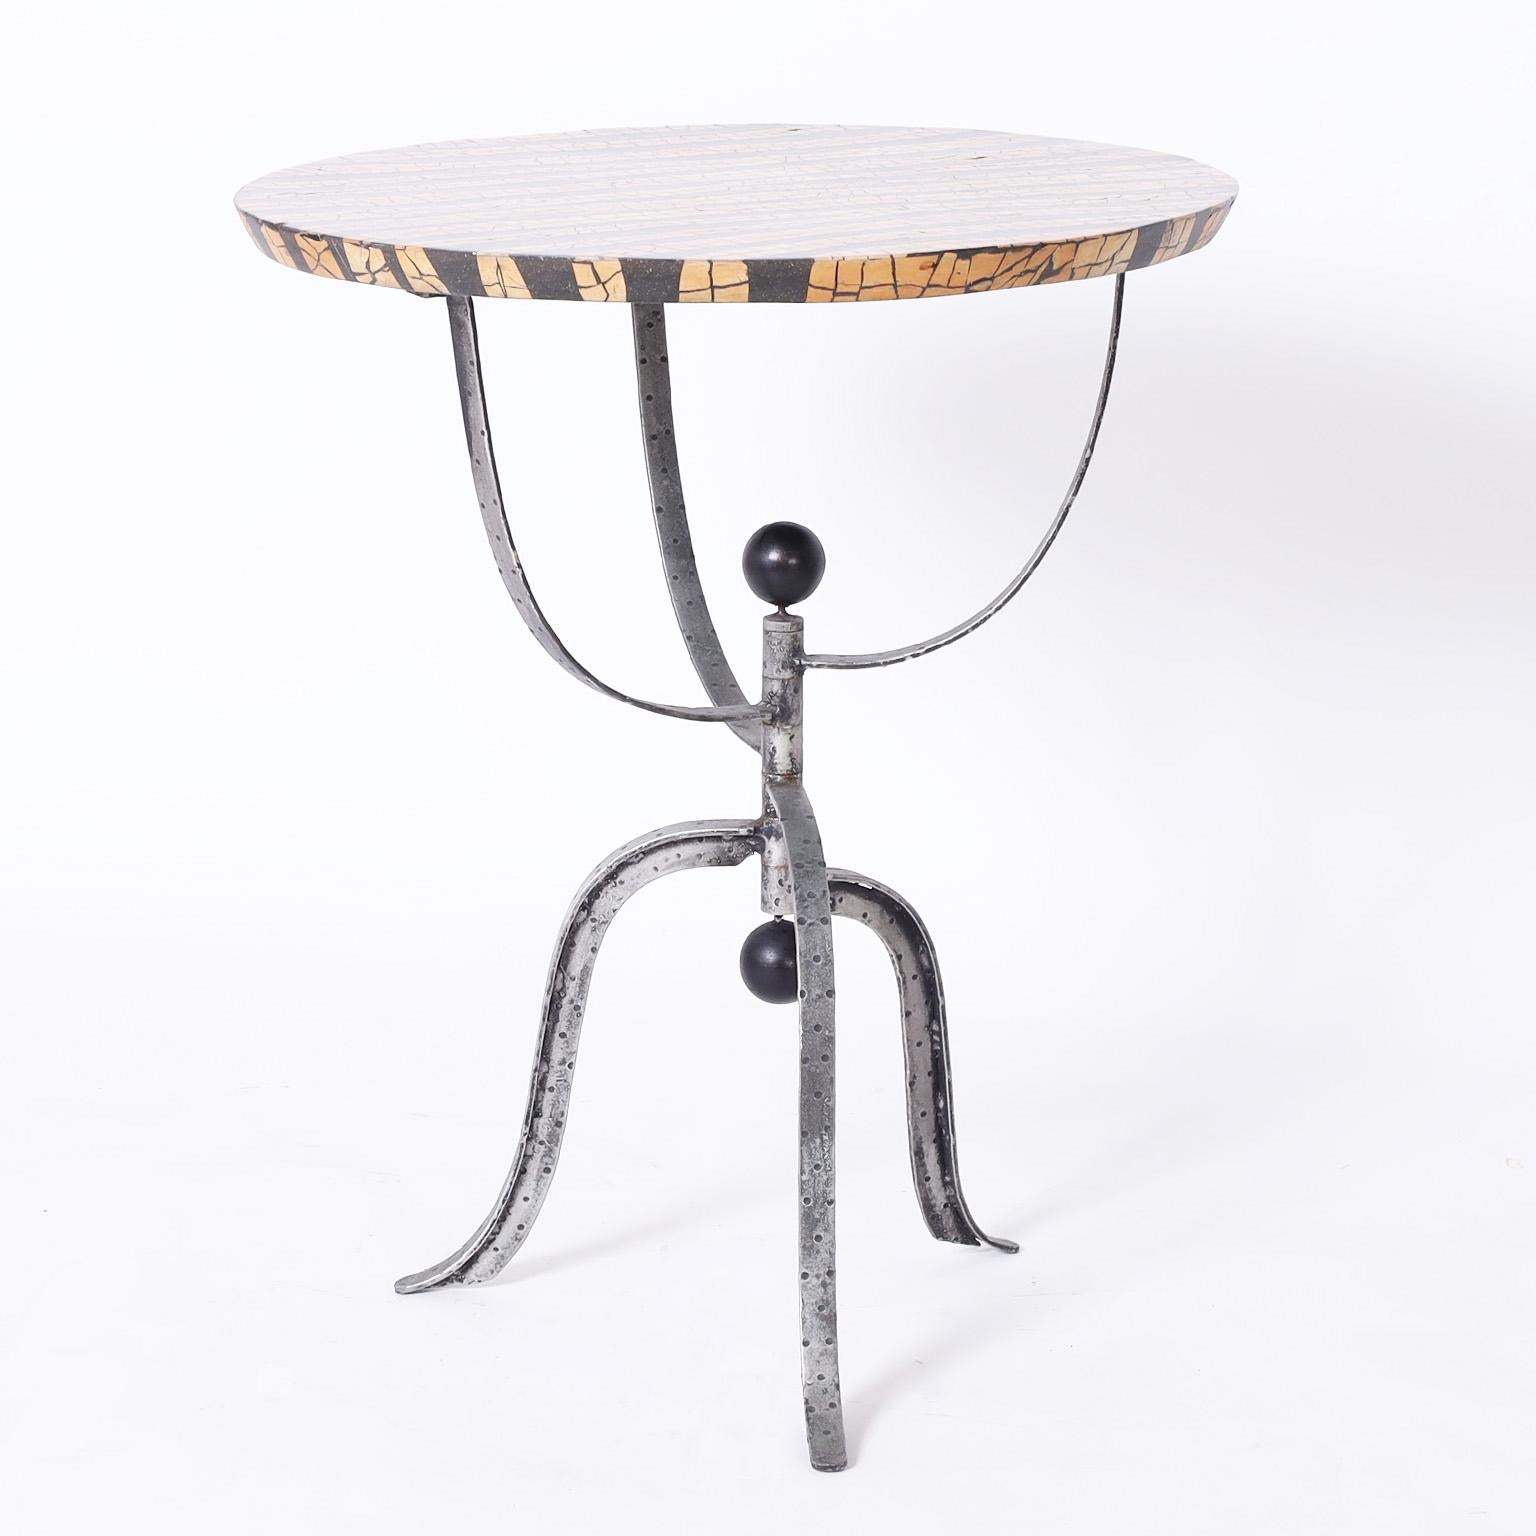 Unusual modernist stand or table with a round top crafted in a coconut mosaic over a post modern style hand wrought three leg base with round black finials.